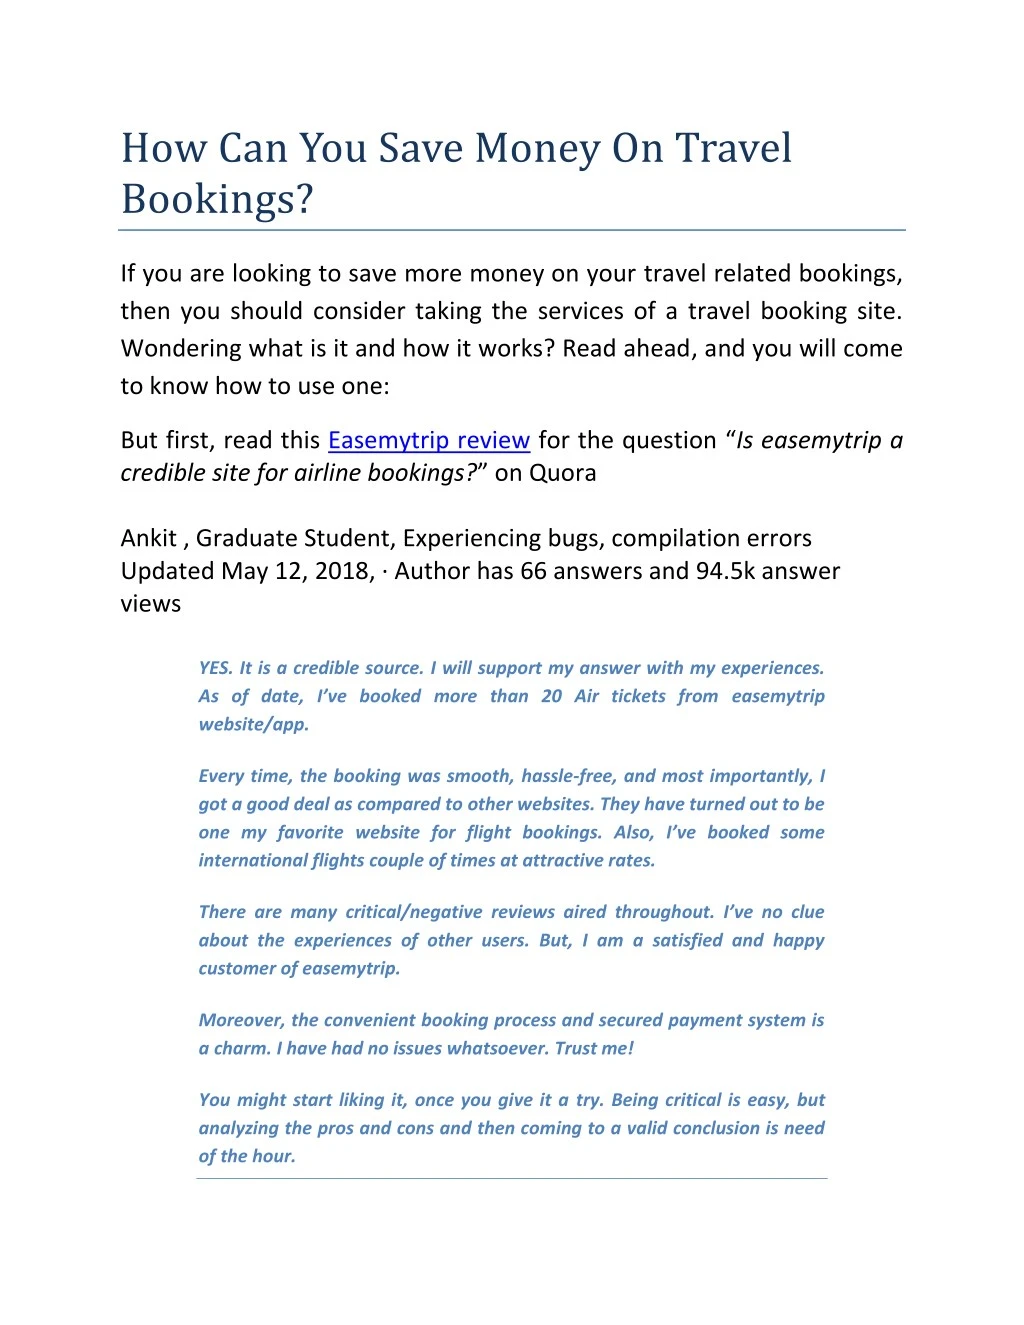 how can you save money on travel bookings